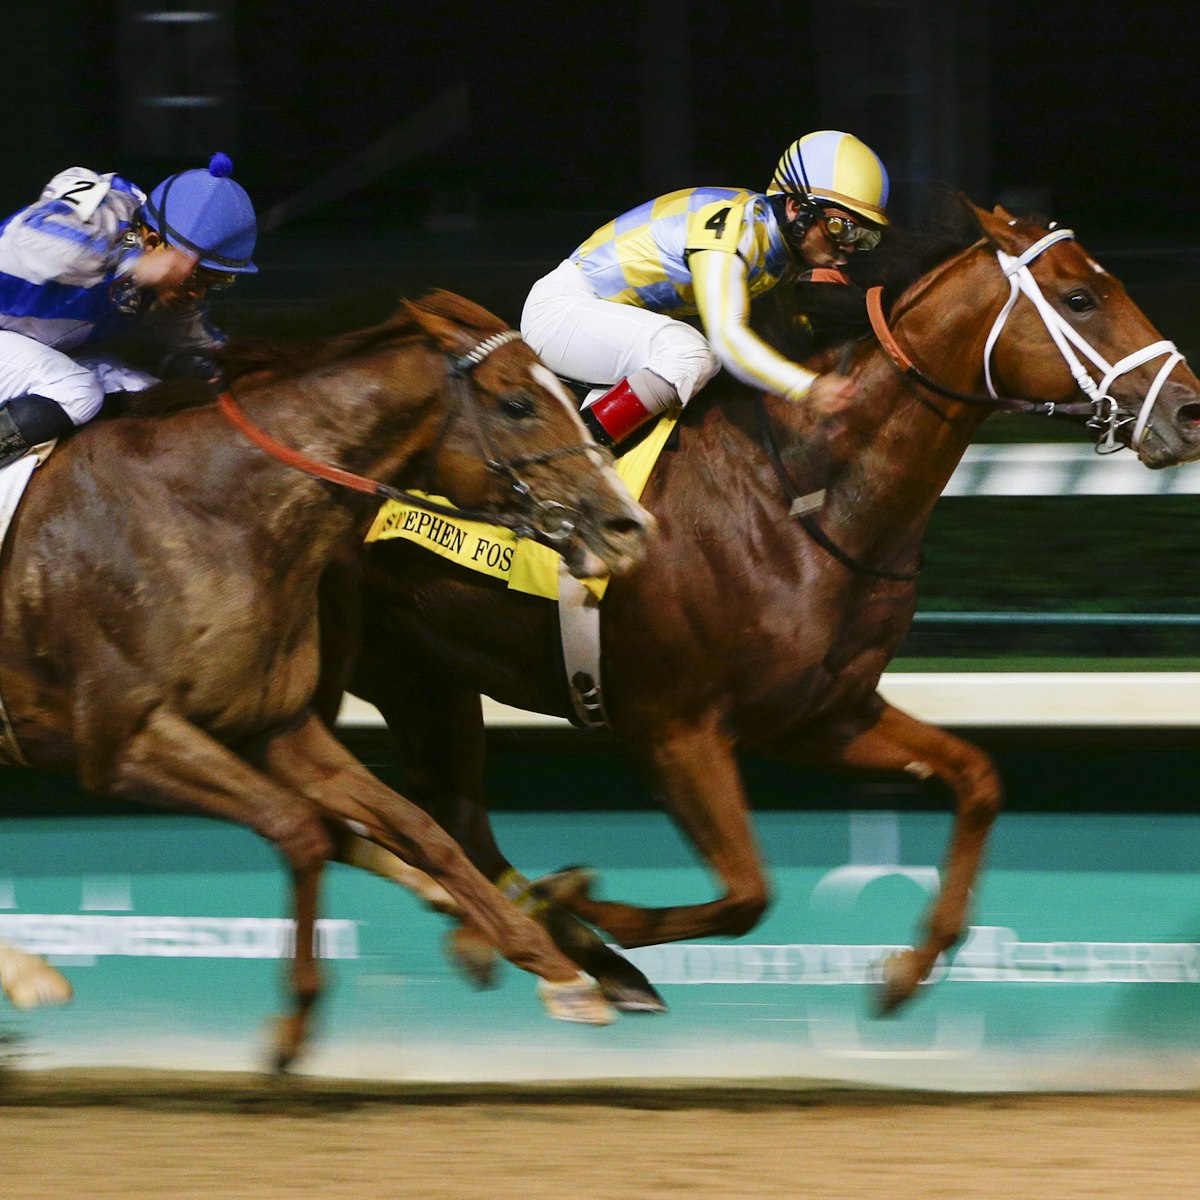 Noble Bird, right, with Shaun Bridgemohan up, wins the Stephen Foster Handicap at Churchill Downs on Saturday, June 12, 2015, in Louisville, Ky. (Mark Cornelison/Lexington Herald-Leader/TNS via Getty Images)